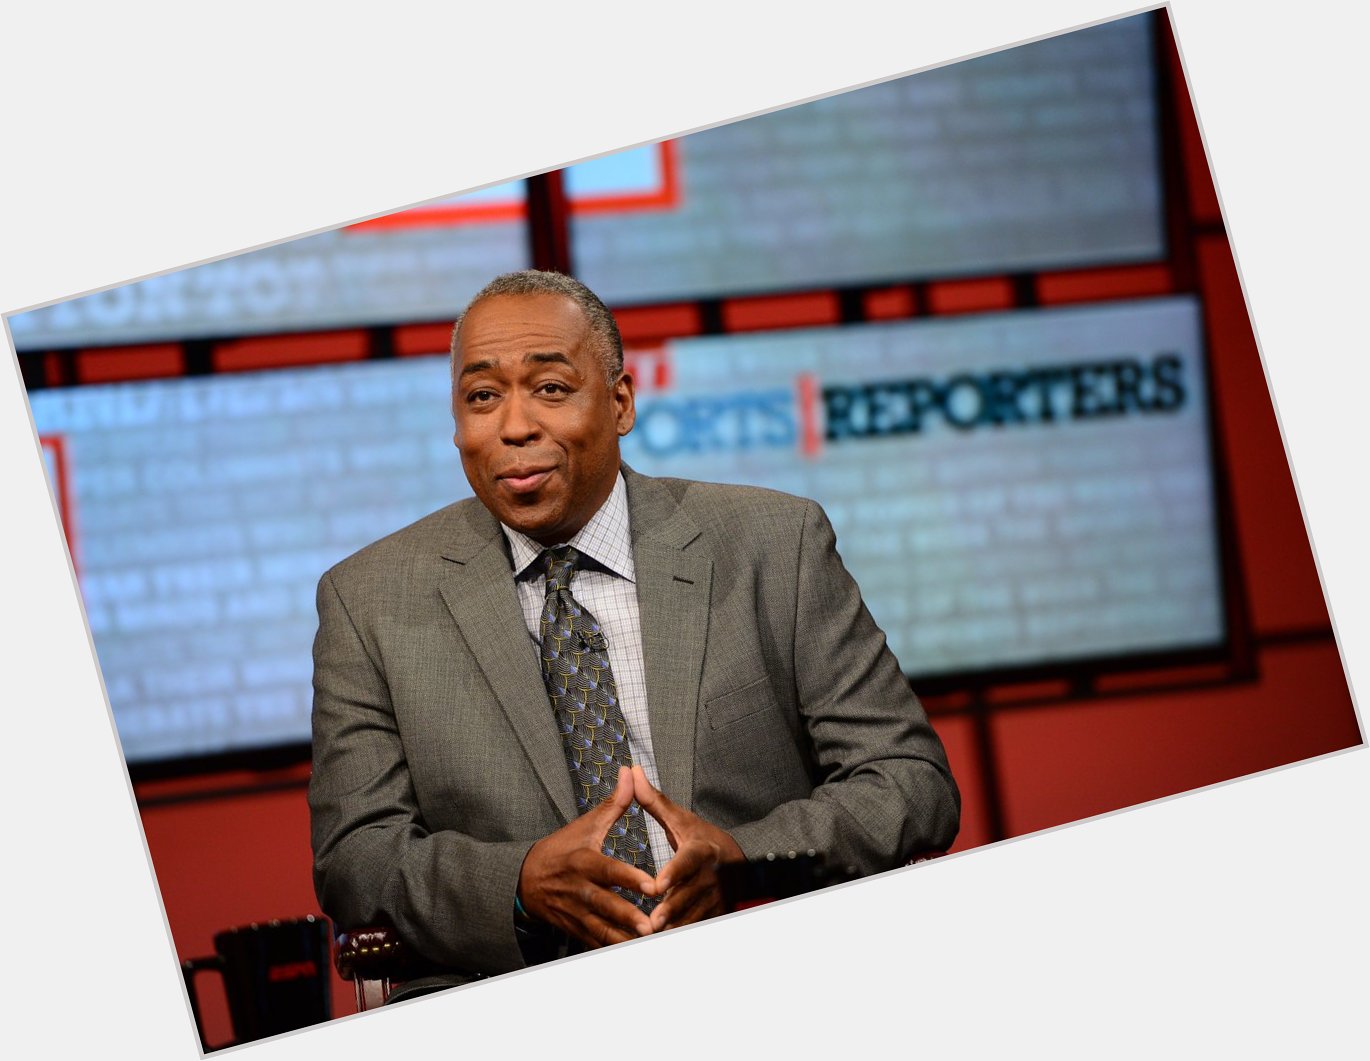 Happy birthday John Saunders. He continues to be missed by so many, especially here at ESPN. 